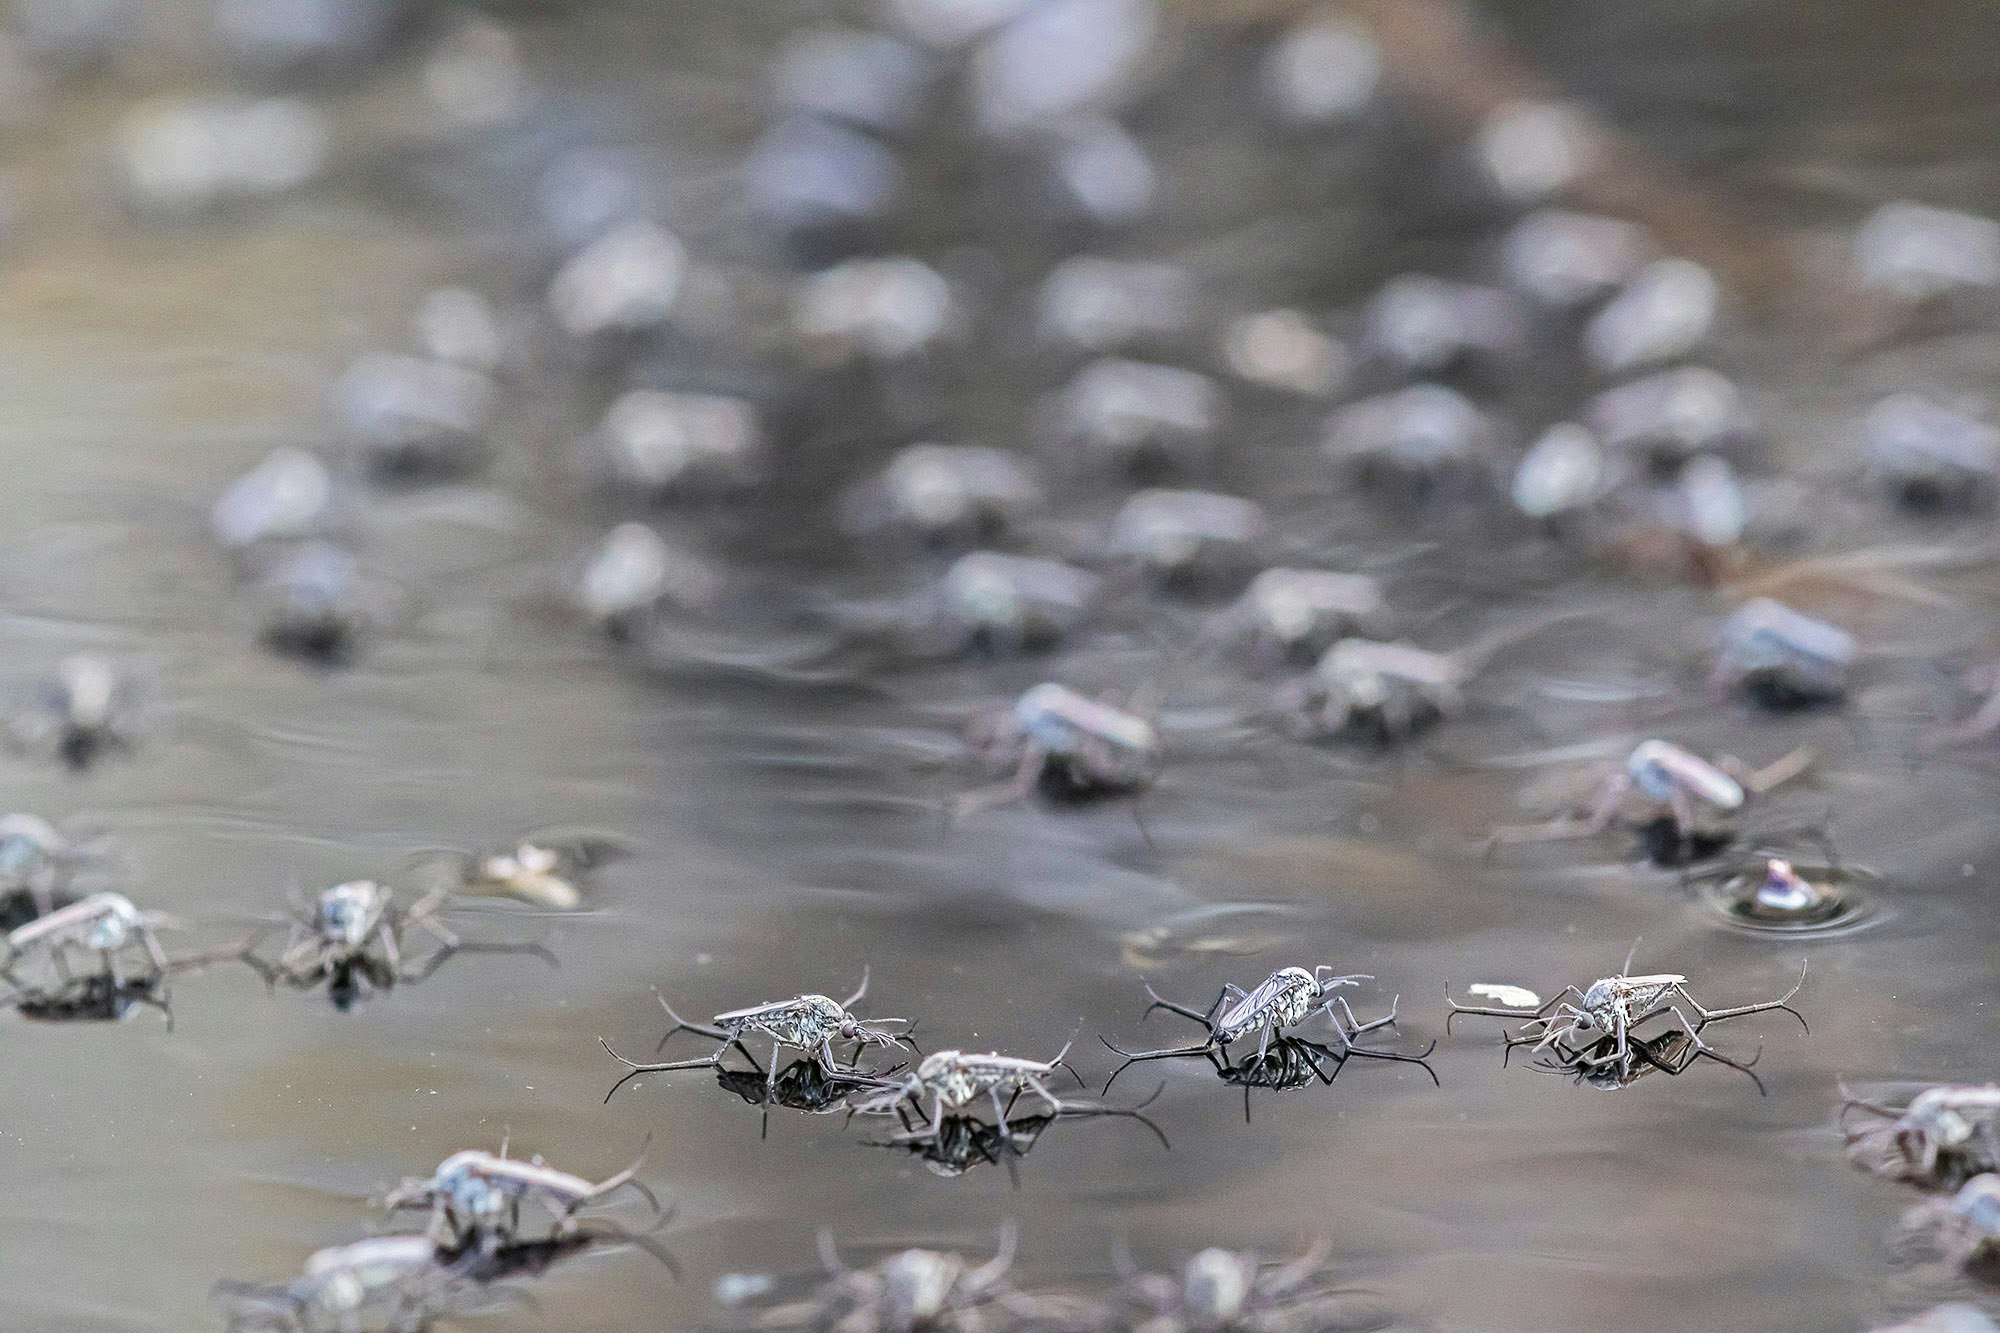 Insects sitting on the surface of the water